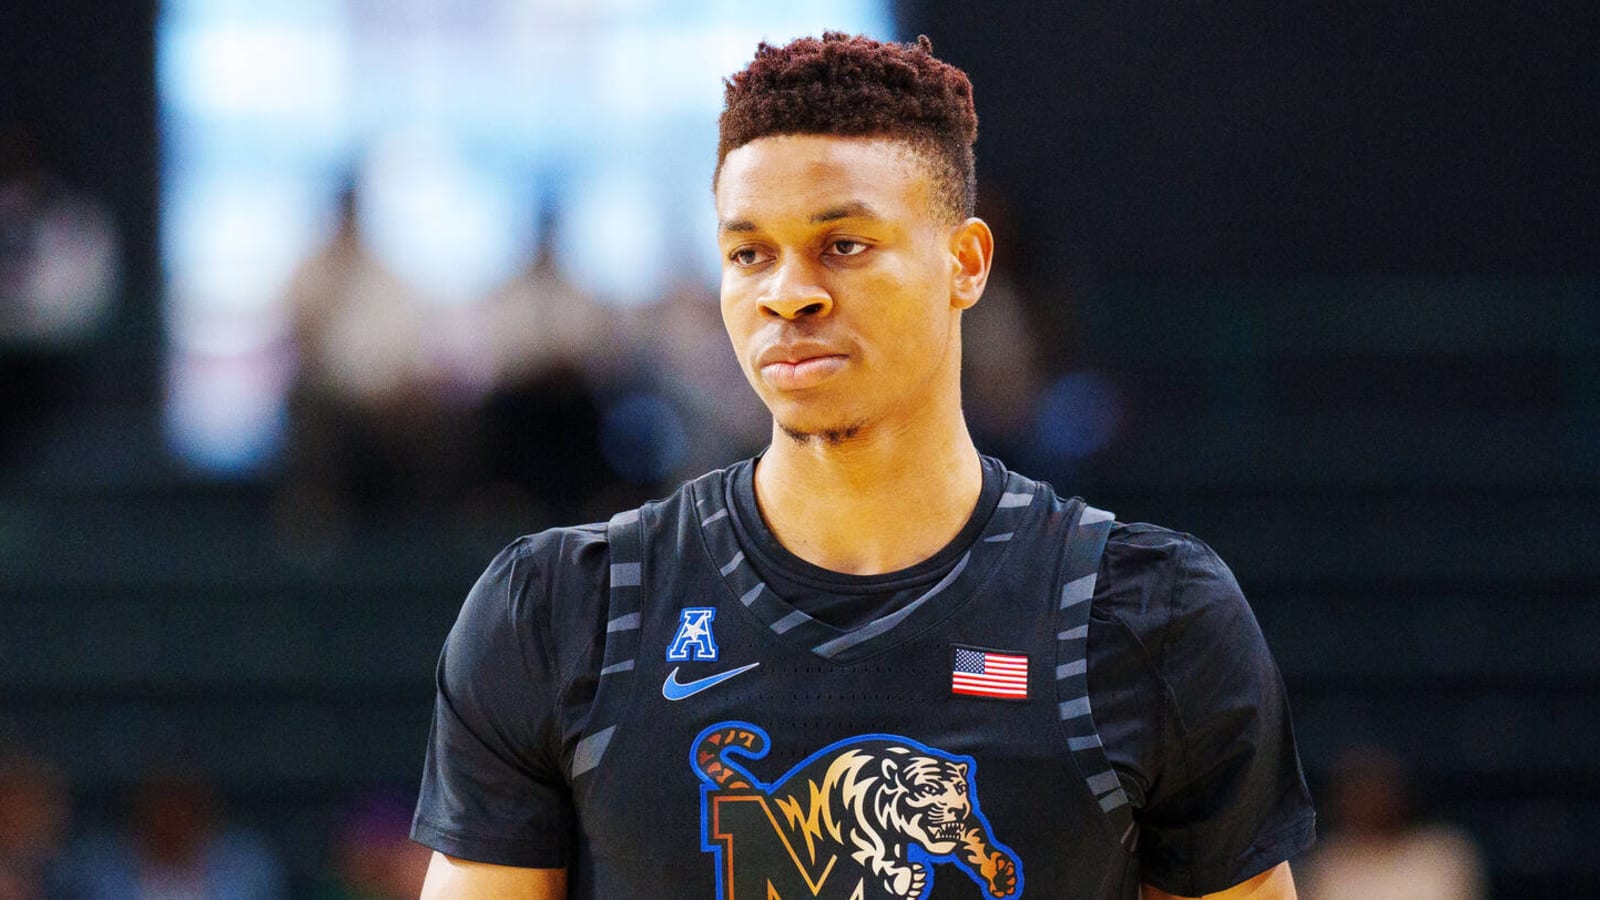 Several players pull out of draft, Memphis forward going pro